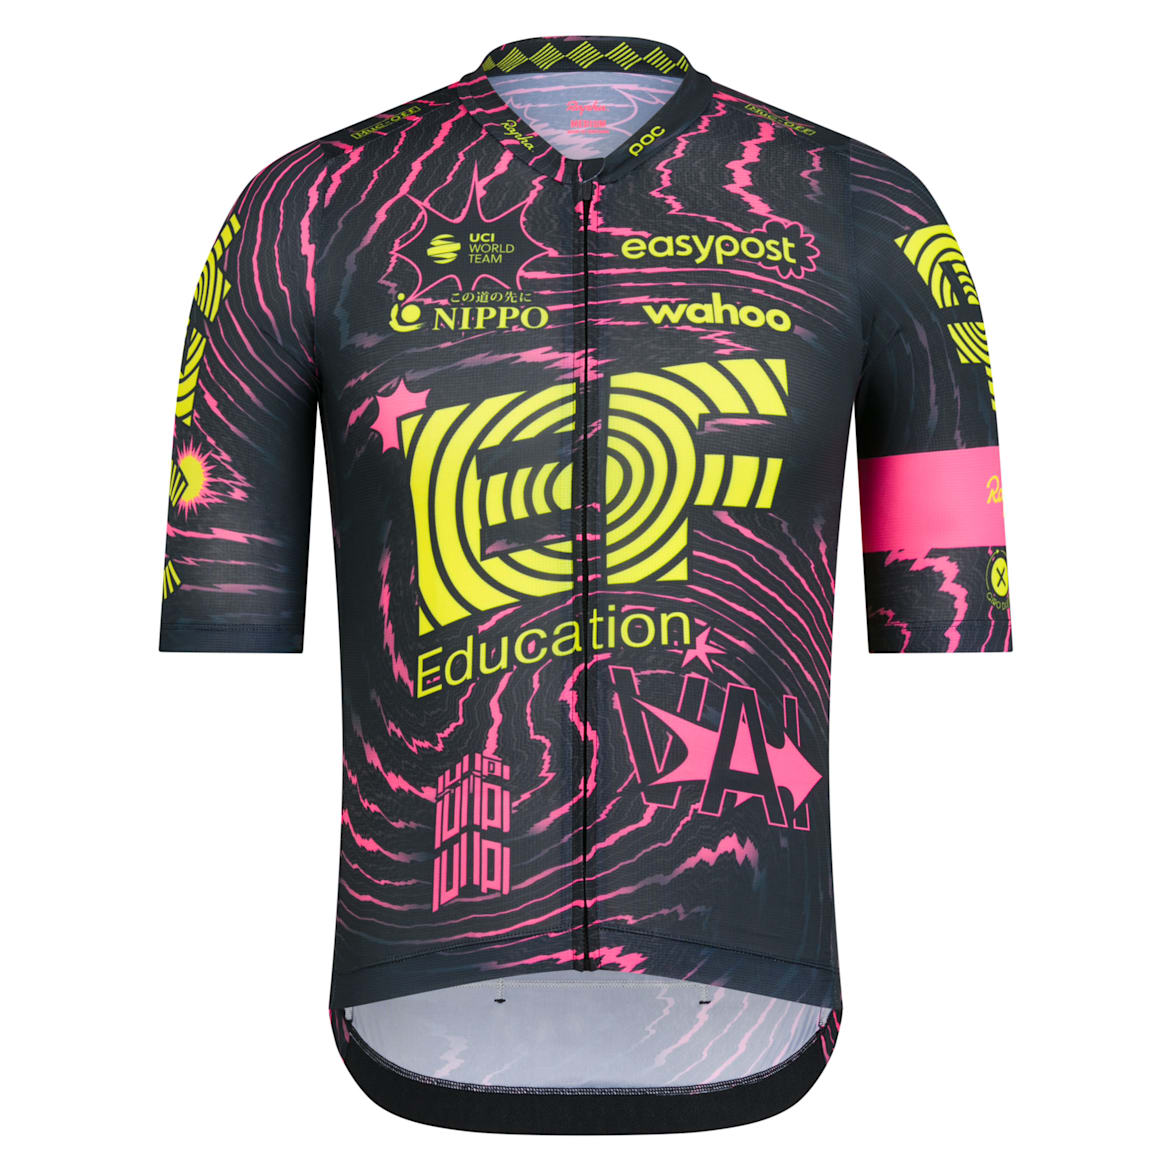 EF Education - EasyPost Pro Team Training Jersey - Switch-out